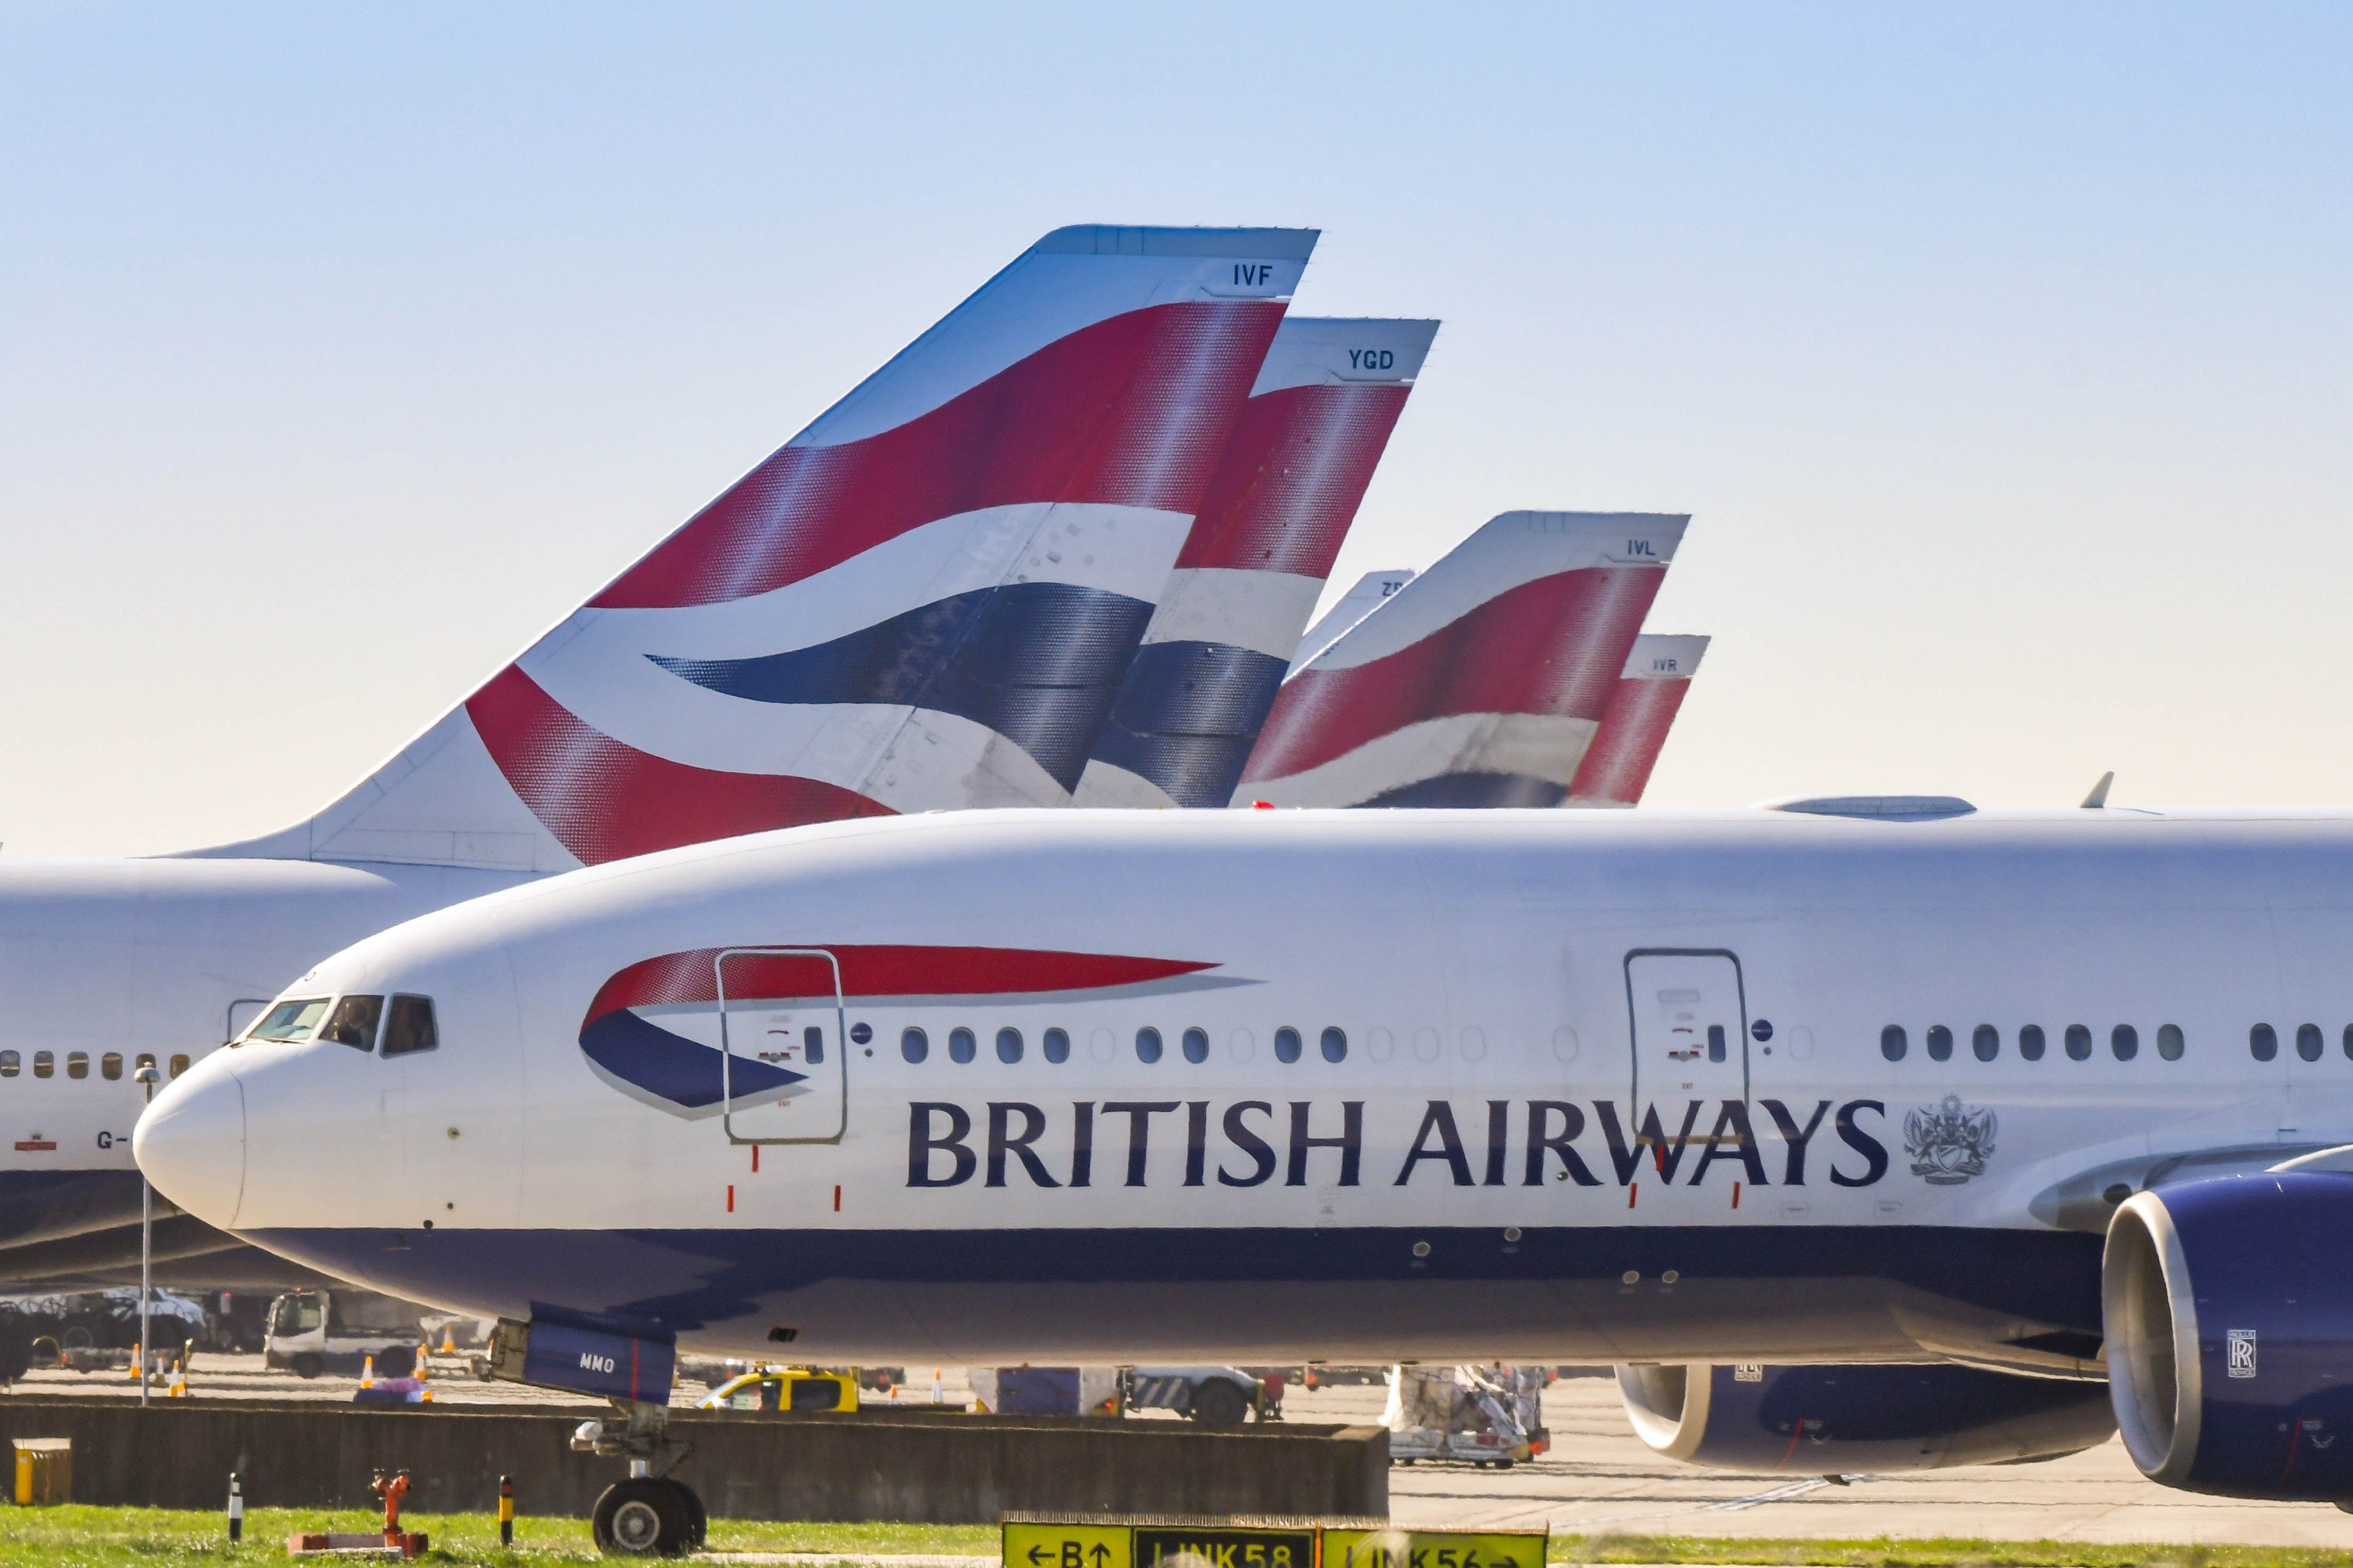 A Closeup of a British Airways Boeing 777 In front of several parked British Airways aircraft.